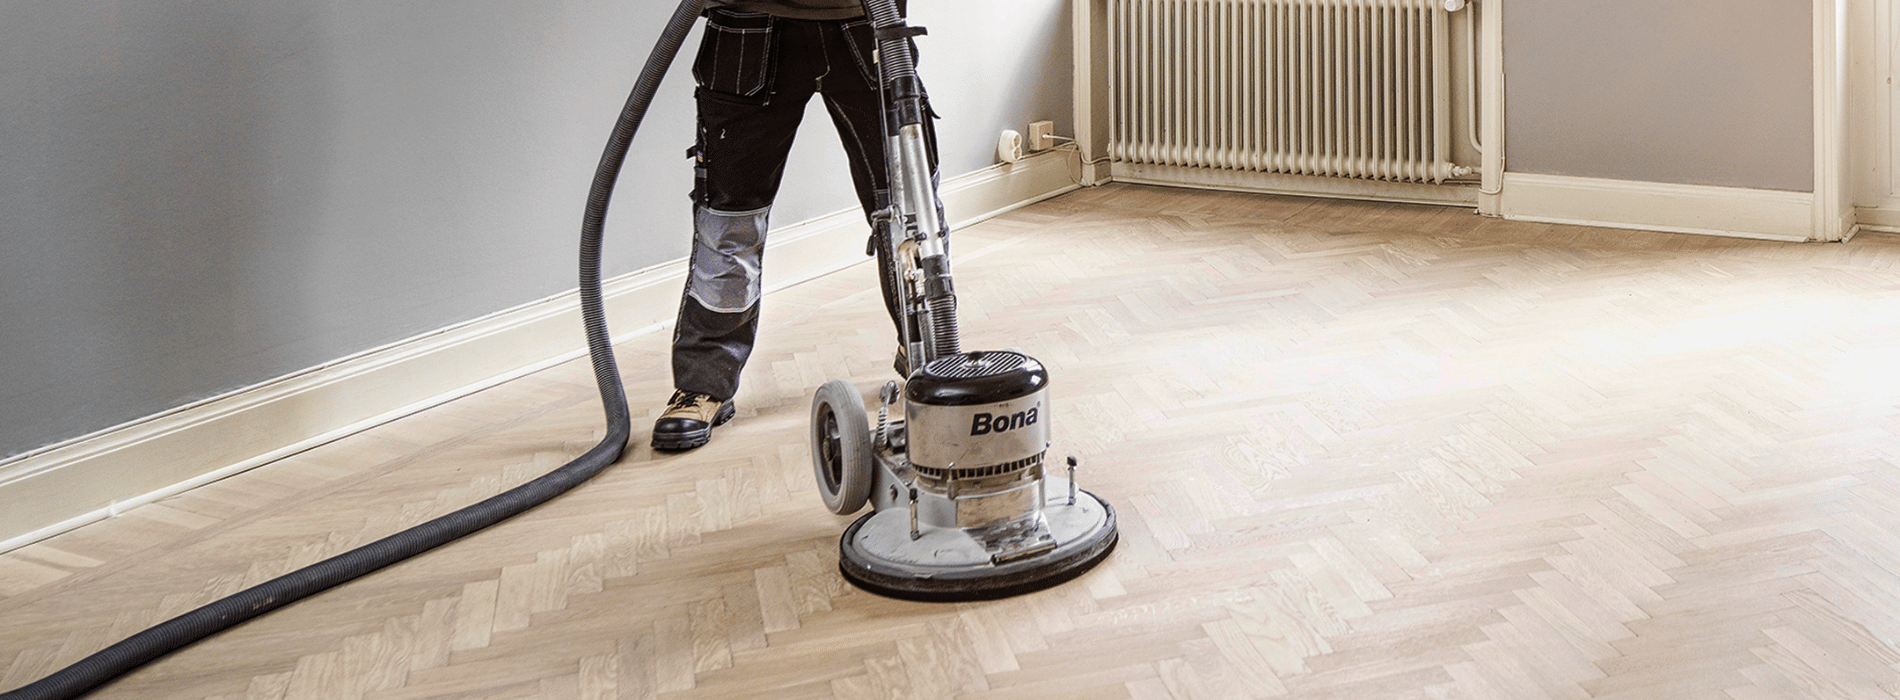 In Whetstone, N20, Mr Sander® are using a Bona FlexiSand 1.5 buffer sander with Ø 405 mm dimension, 1.8 kW effect, 240 V voltage, and 50 Hz/60 Hz frequency. They connect it to a dust extraction system with a HEPA filter for clean and efficient results while sanding a herringbone floor.